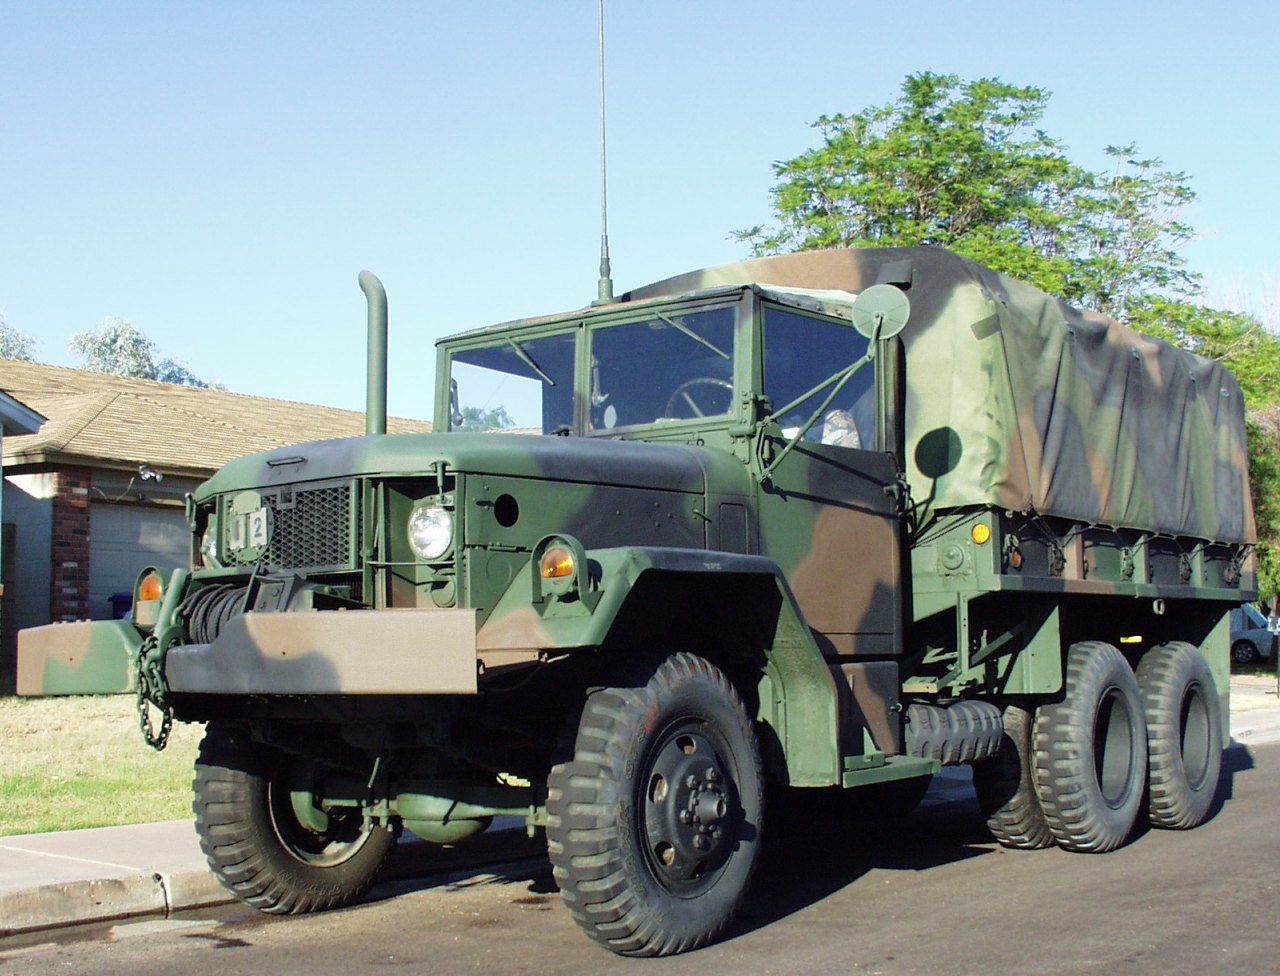 File:M35A2 with winch.jpg - Wikimedia Commons